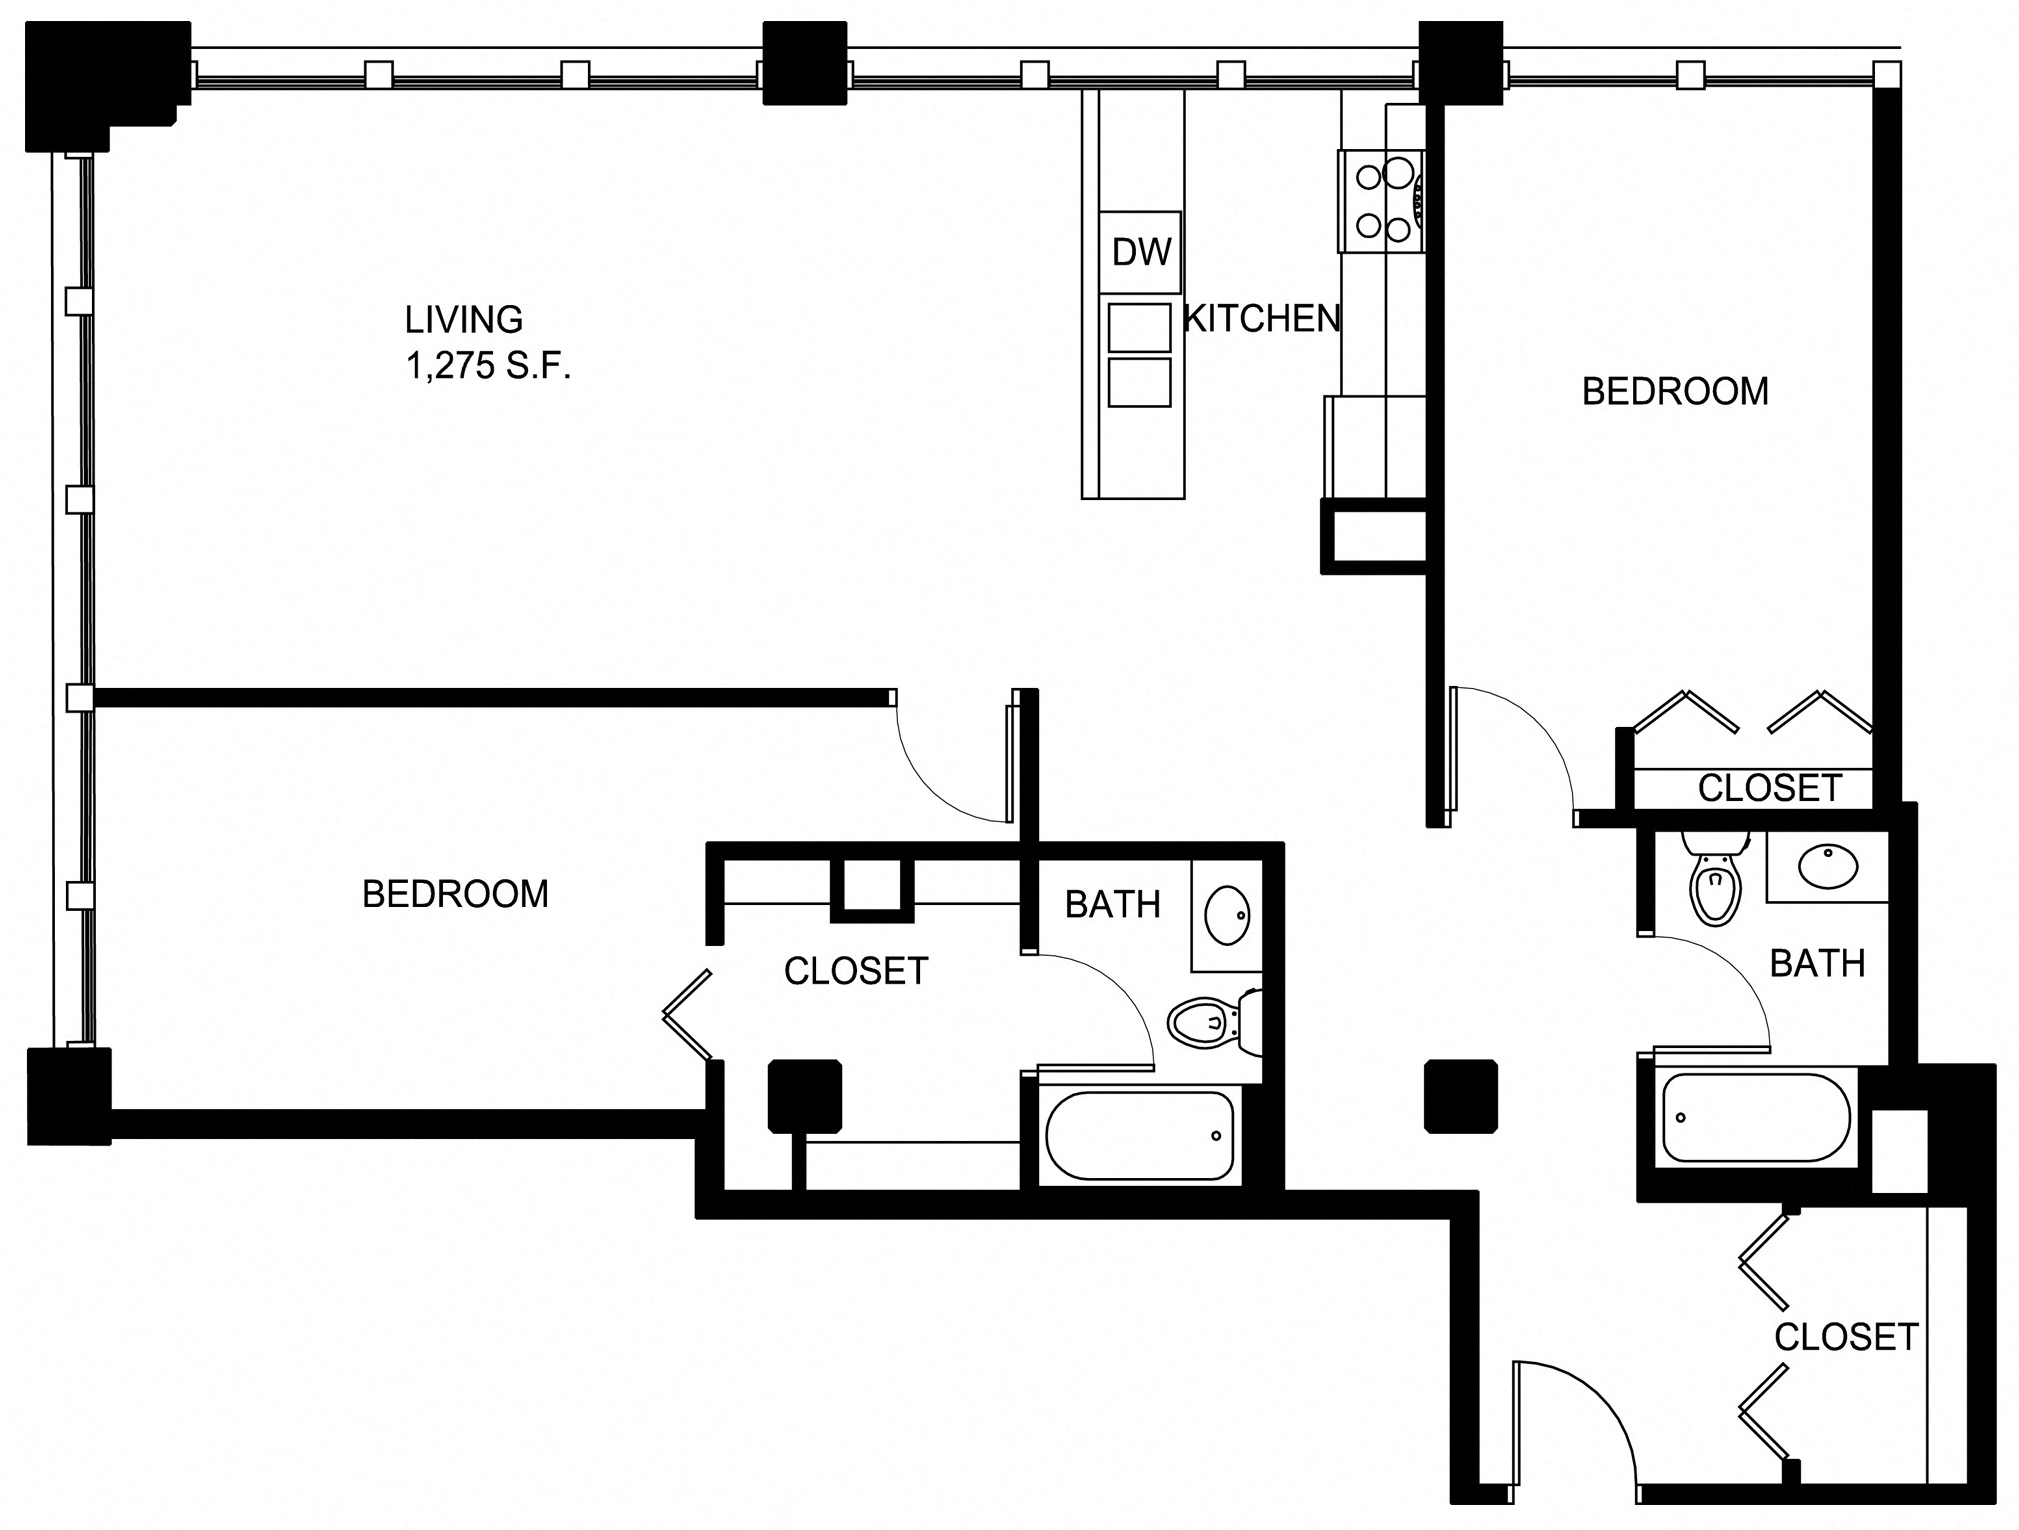 Floorplan for Apartment #P509, 2 bedroom unit at Halstead Providence